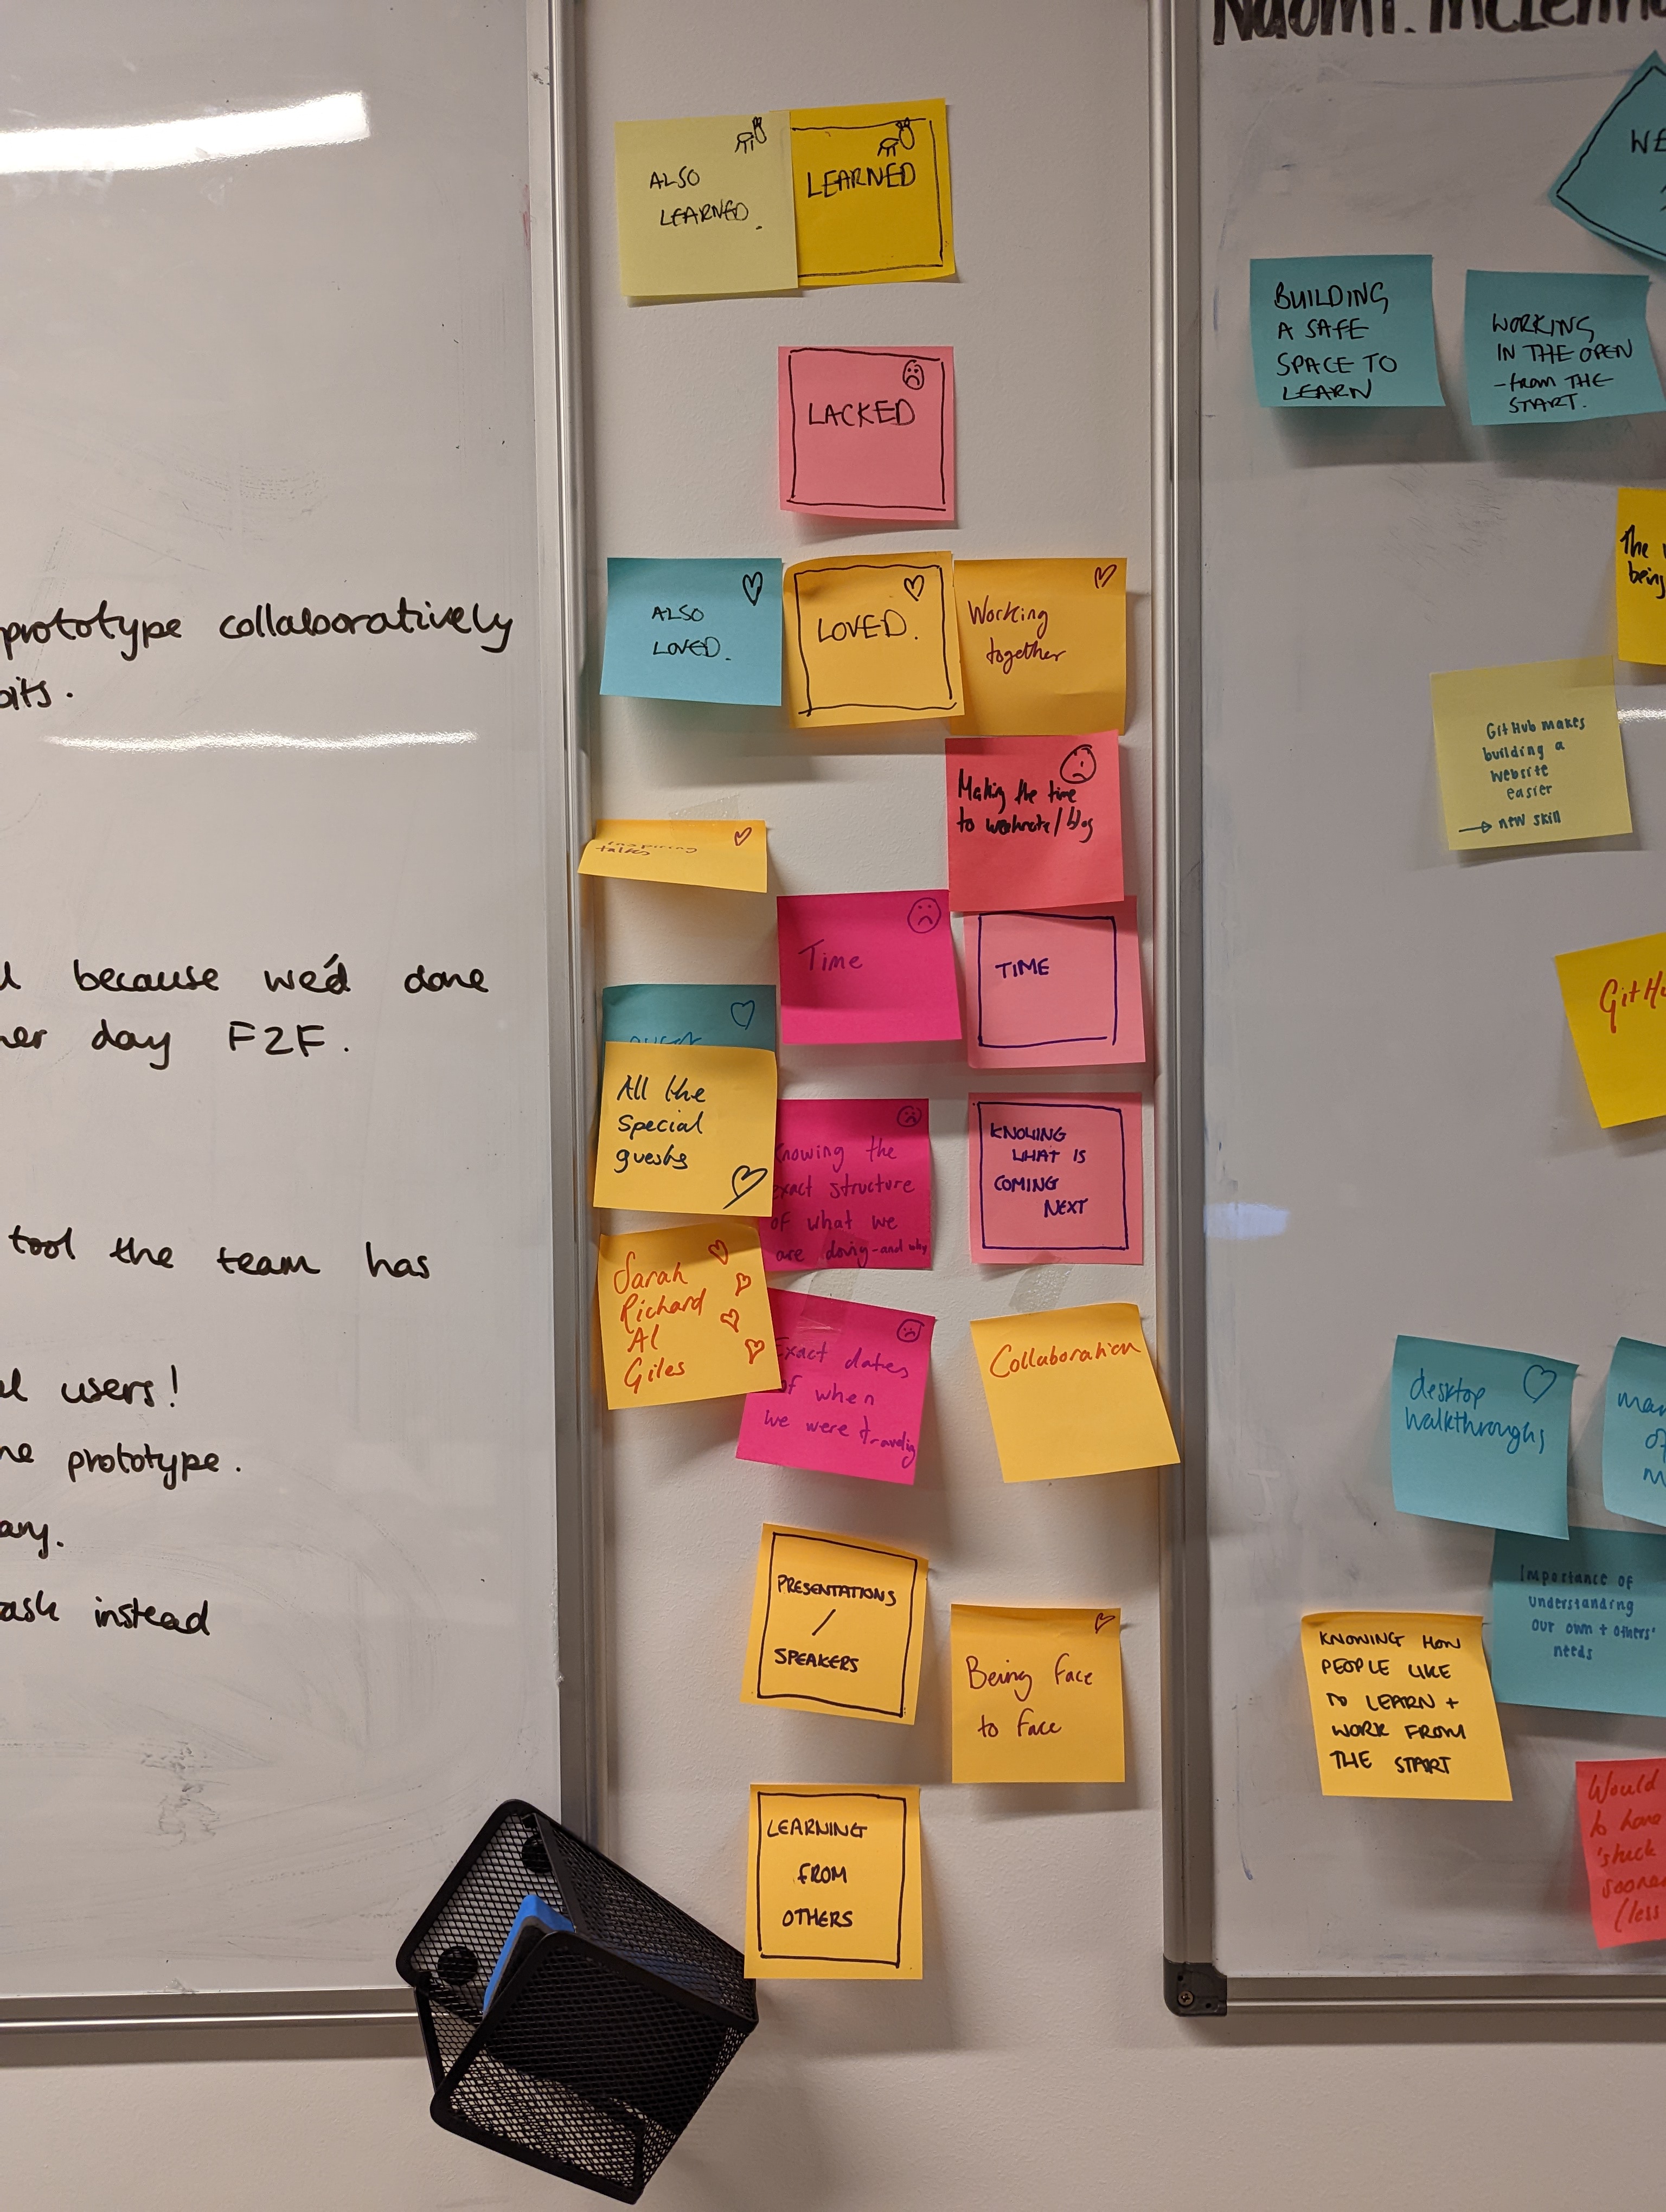 A photo of some of the post-it notes from the team’s retrospective